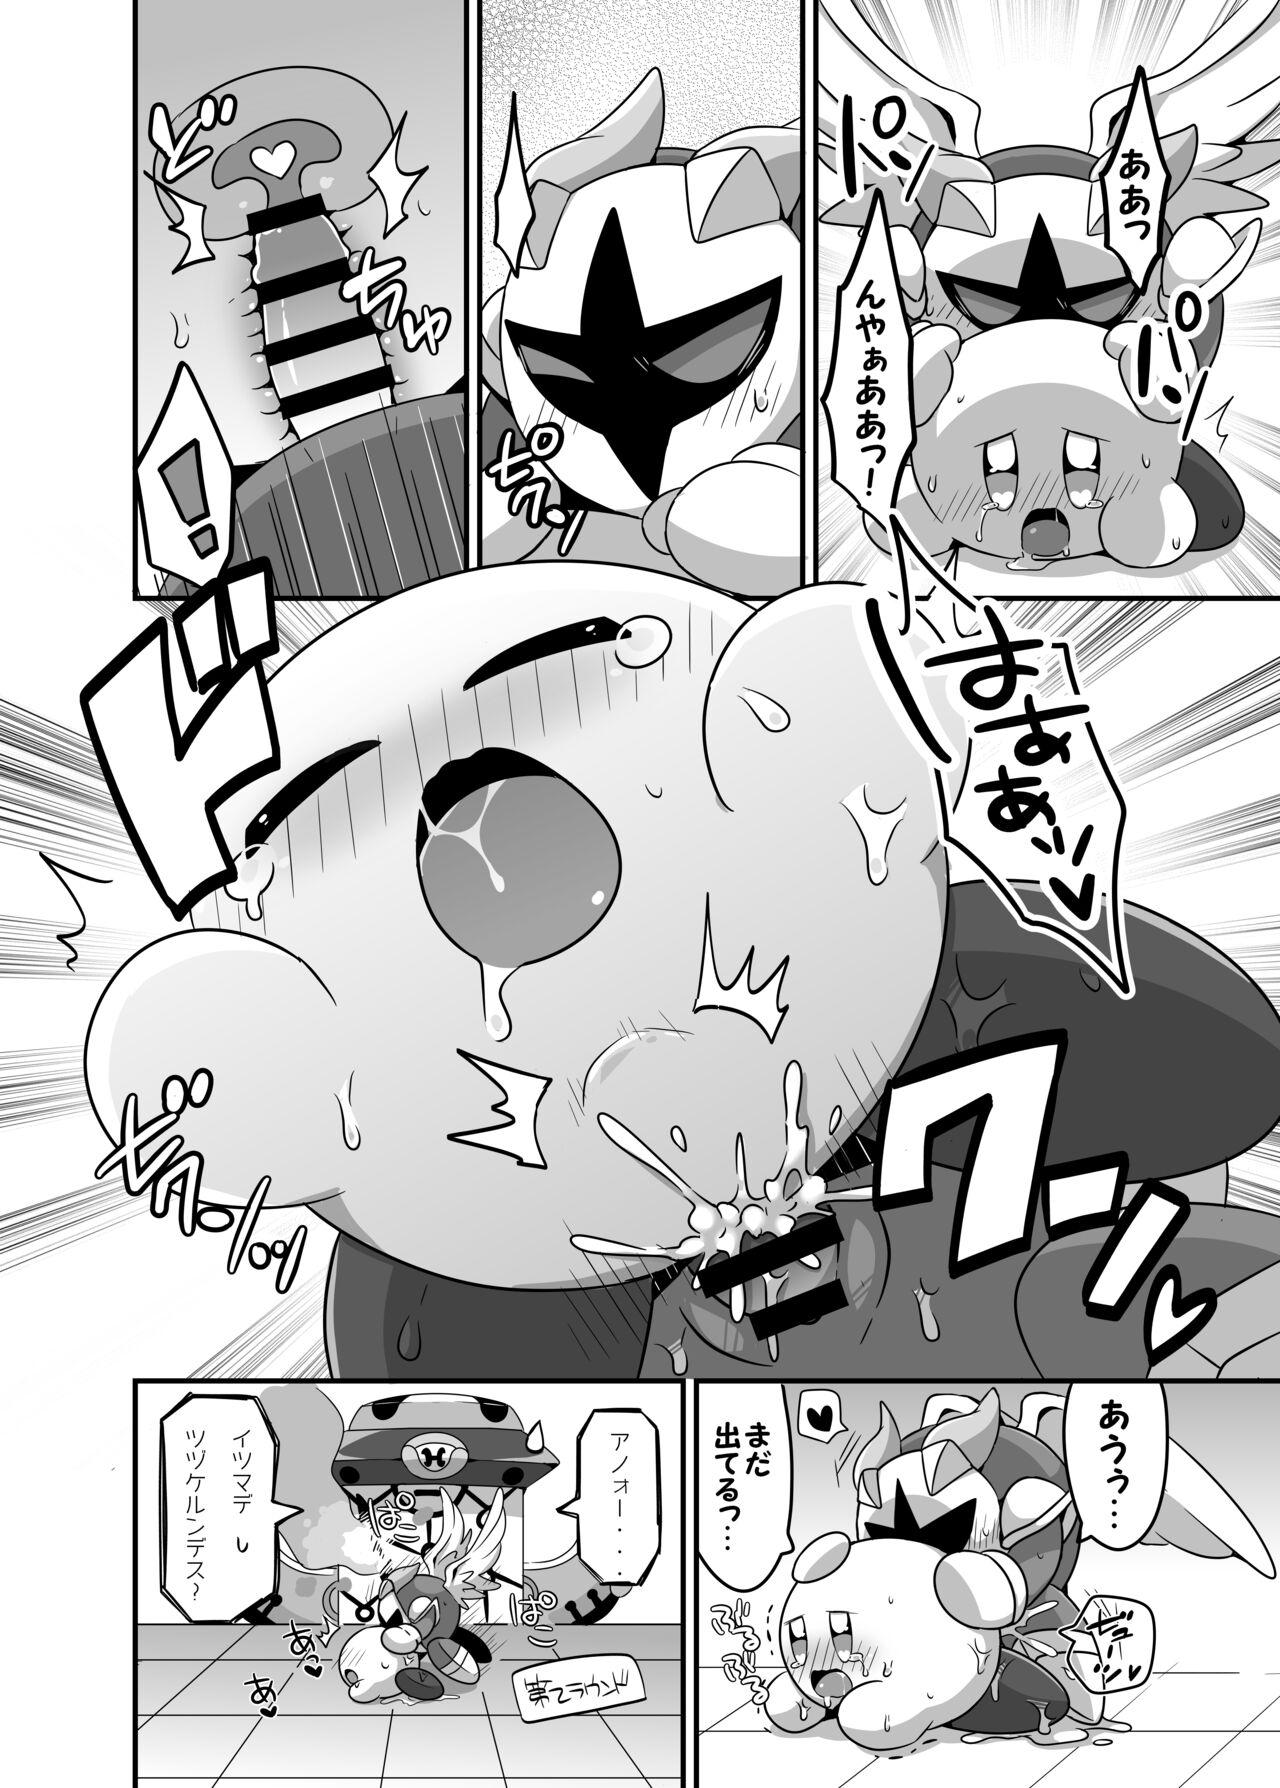 Real Amatuer Porn I Want to Do XXX Even For Spheres! - Kirby Reality - Page 6